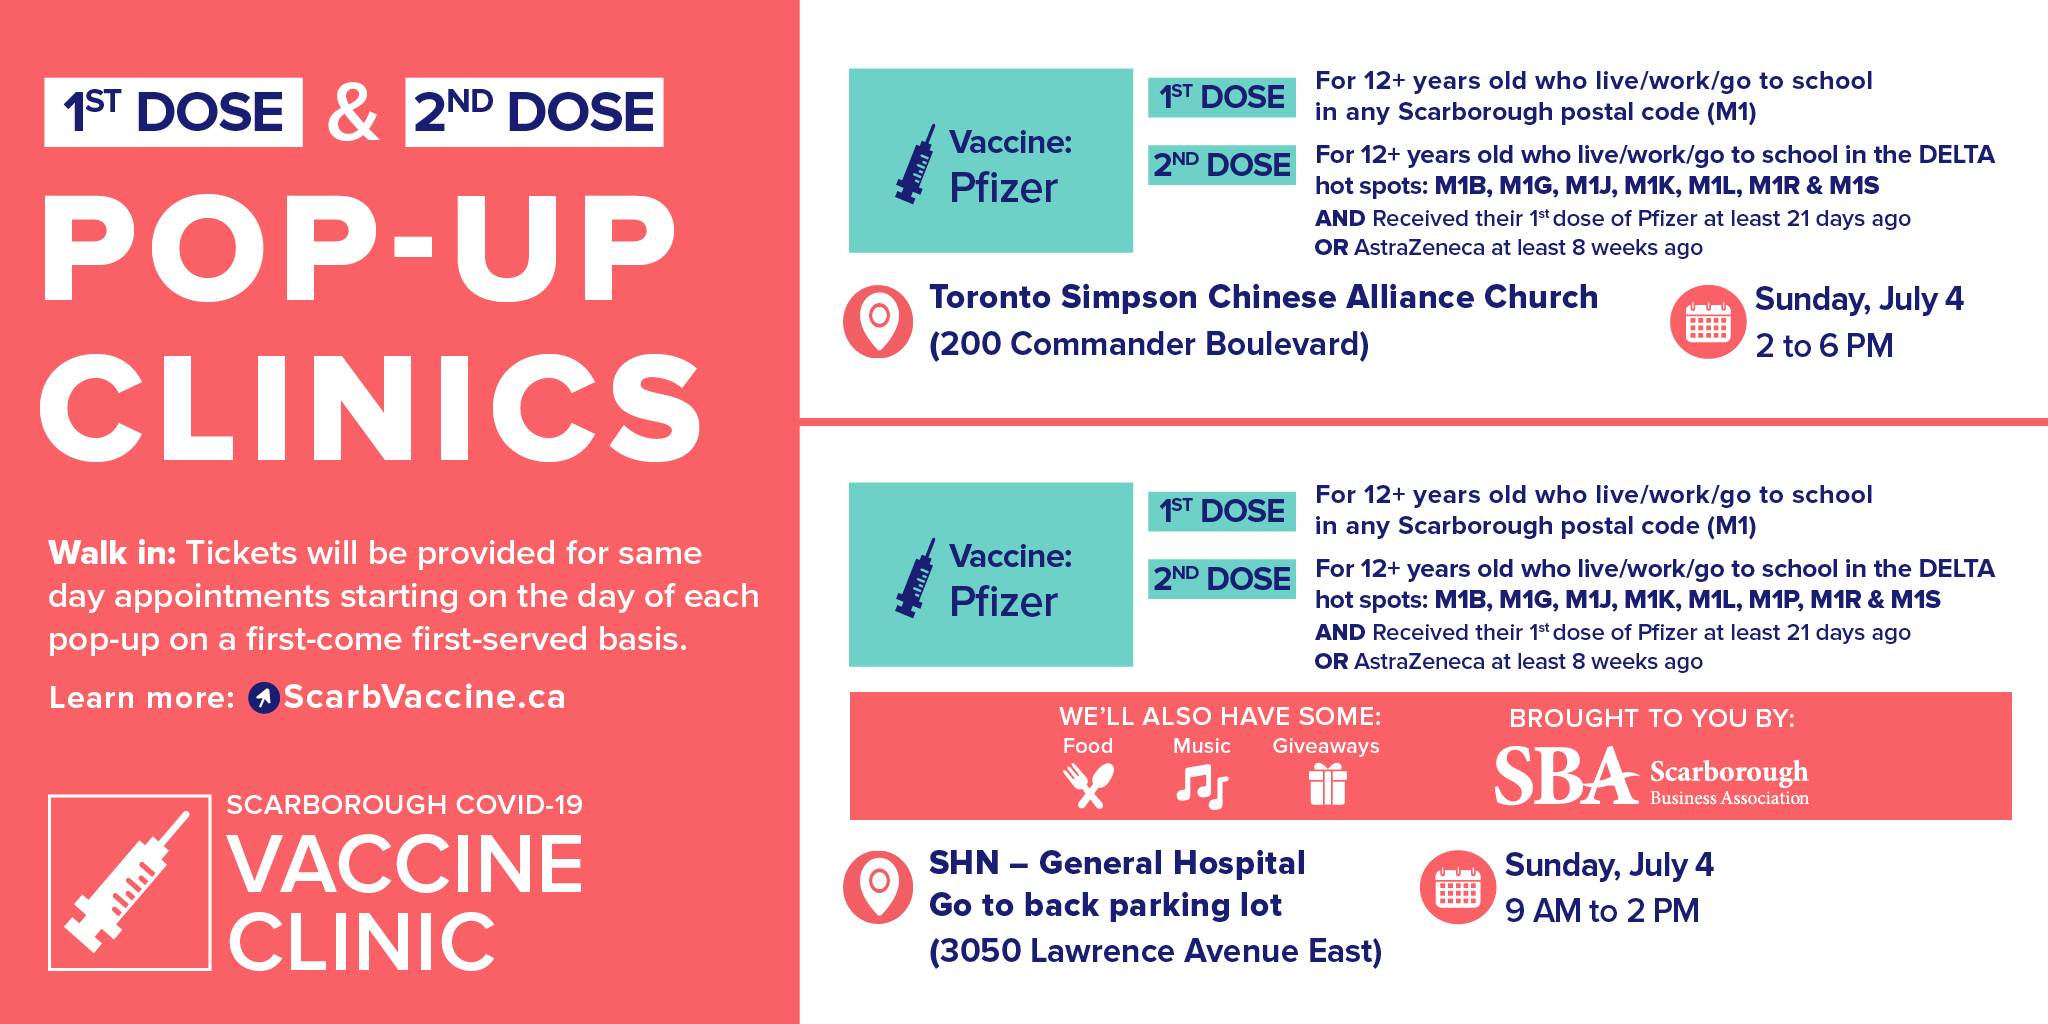 Scarborough Health Network Shn More 1st 2nd Dose Pop Ups Happening This Week In Scarbto Walk In Only Tickets Will Be Provided For Same Day Appointments Starting On The Day